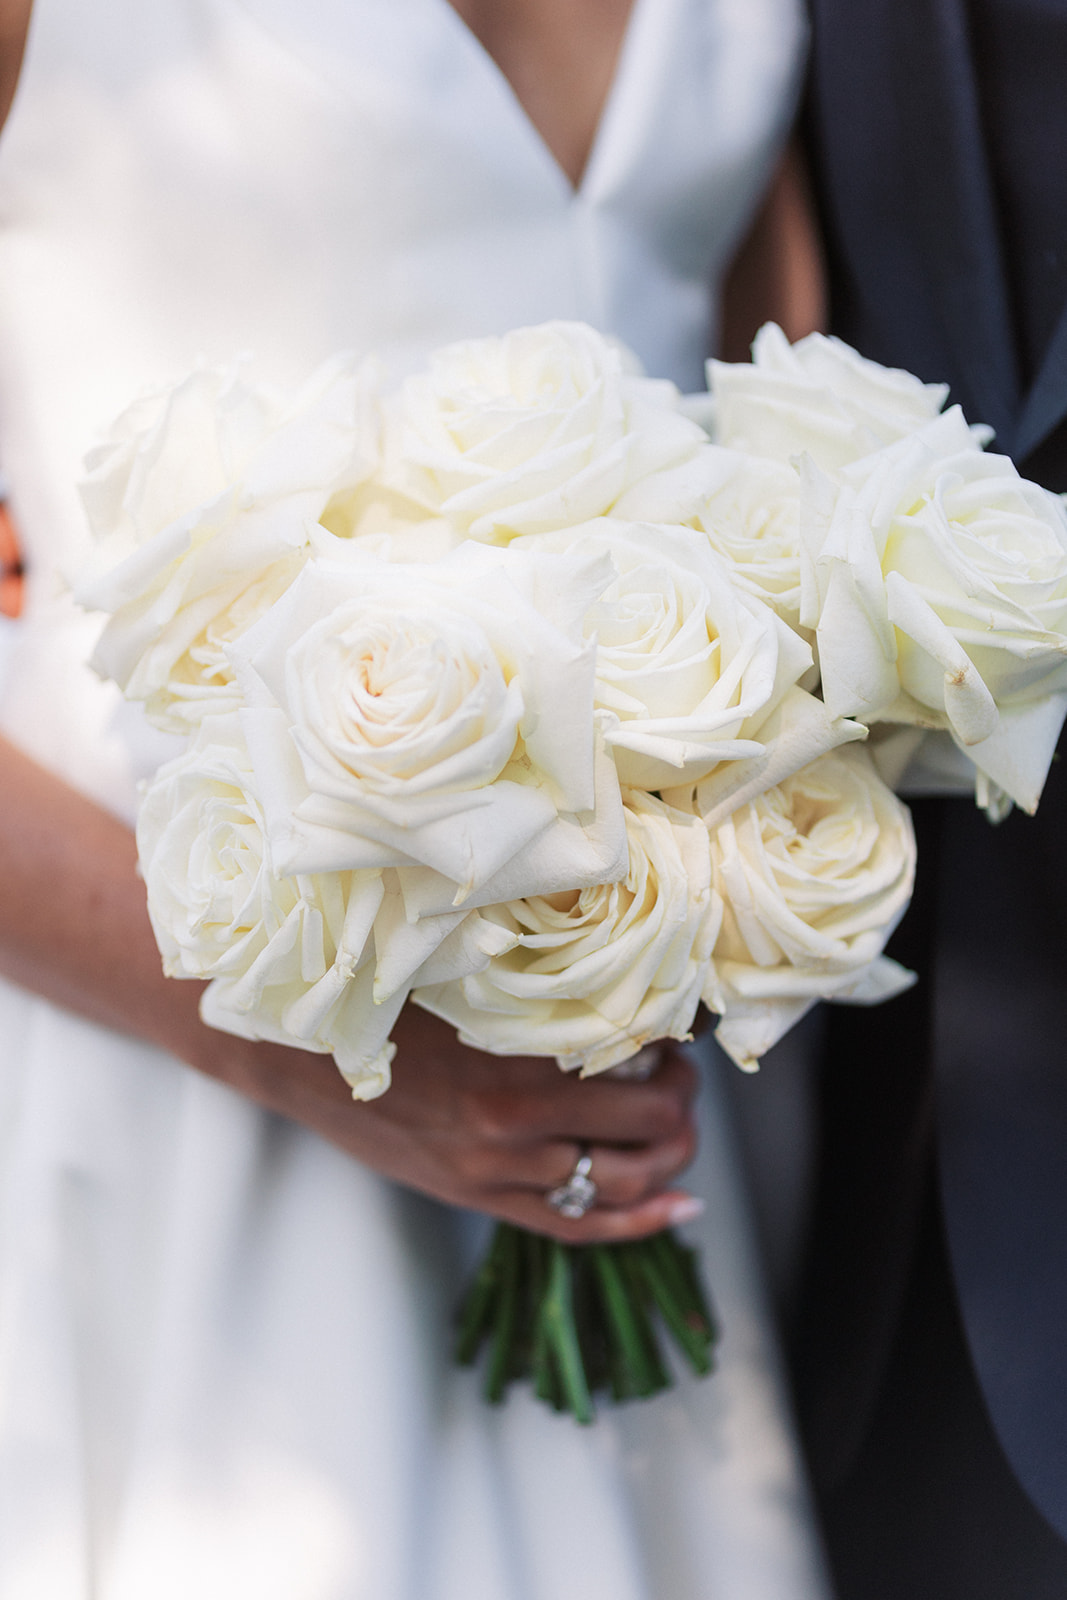 Details of a brides white rose bouquet in her hand